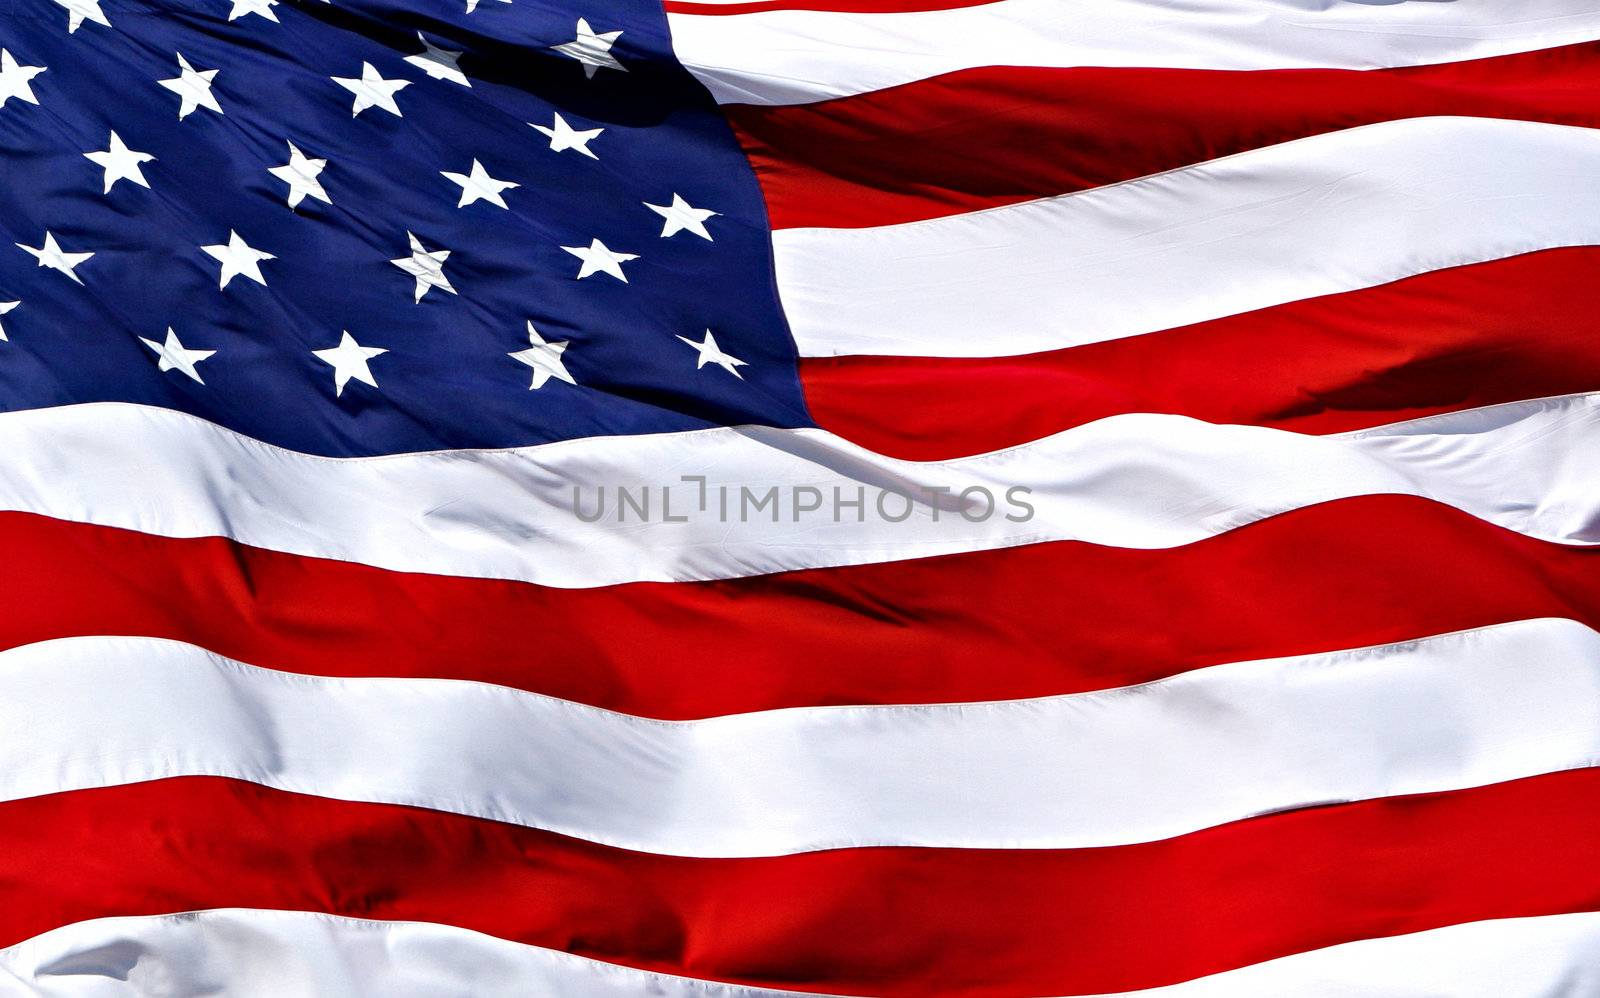 American flag background - shot and lit in studio